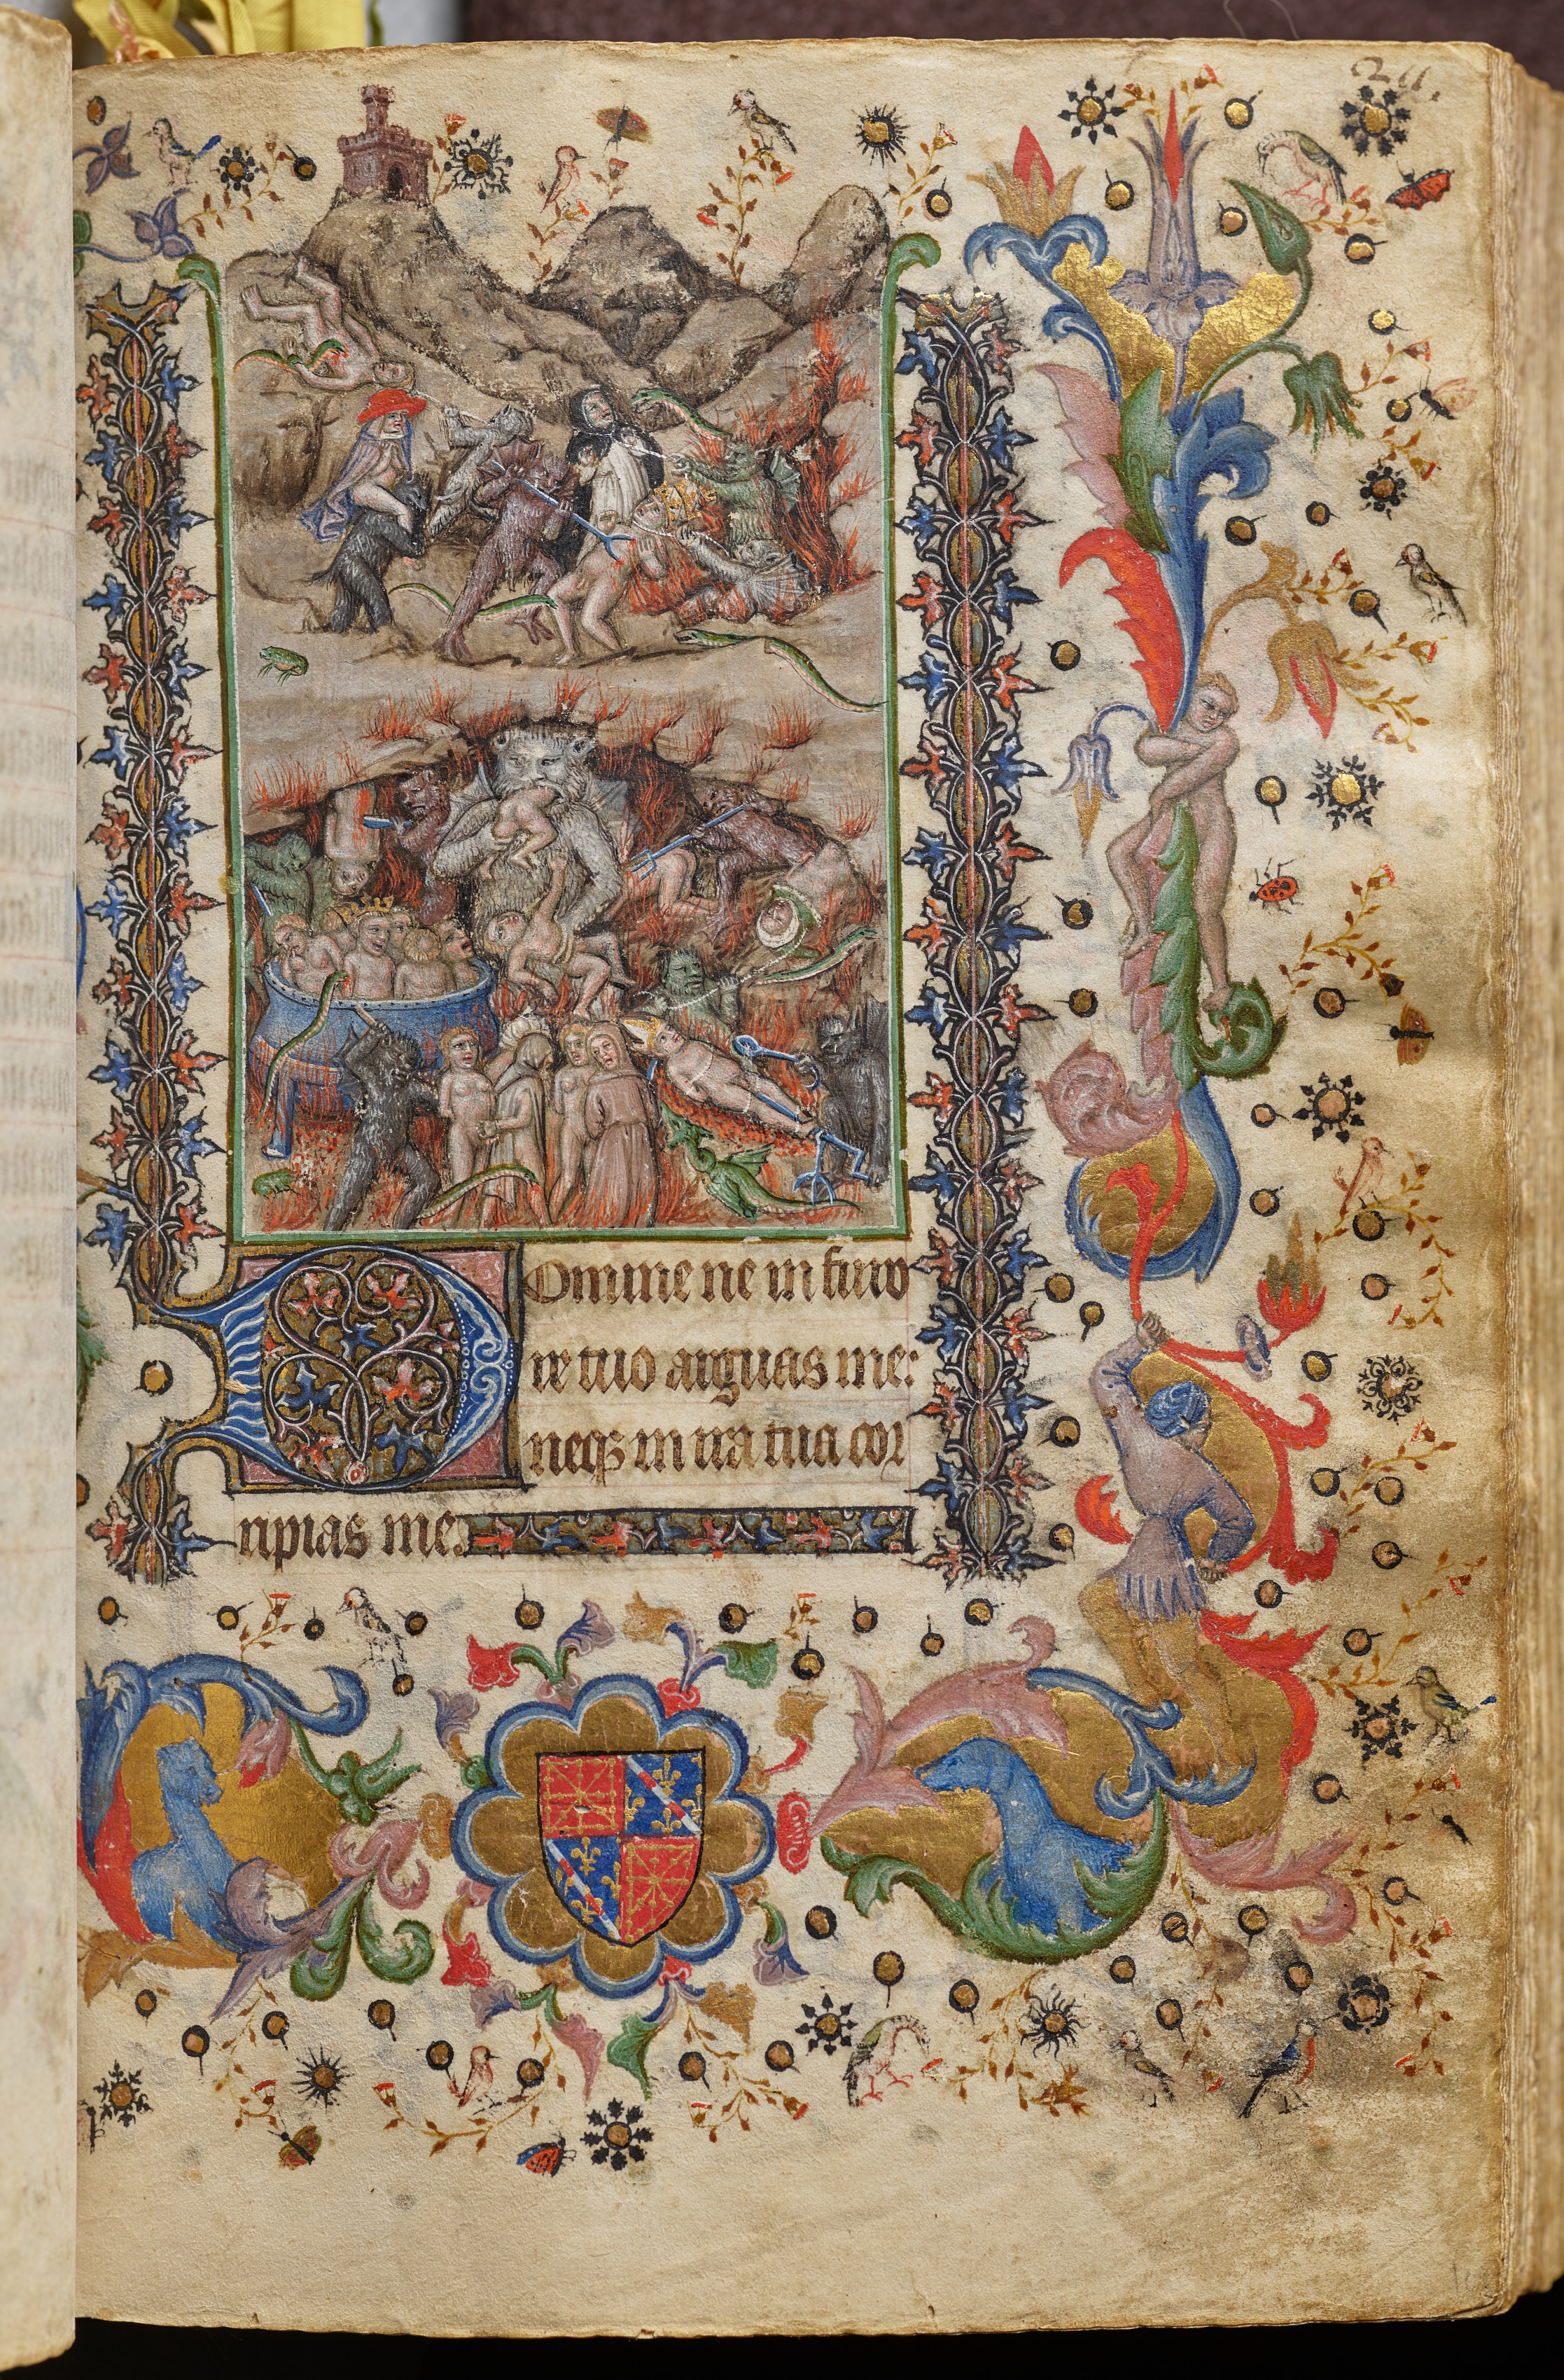 Hours of Charles the Noble, King of Navarre (1361-1425): fol. 106r, Last Judgment